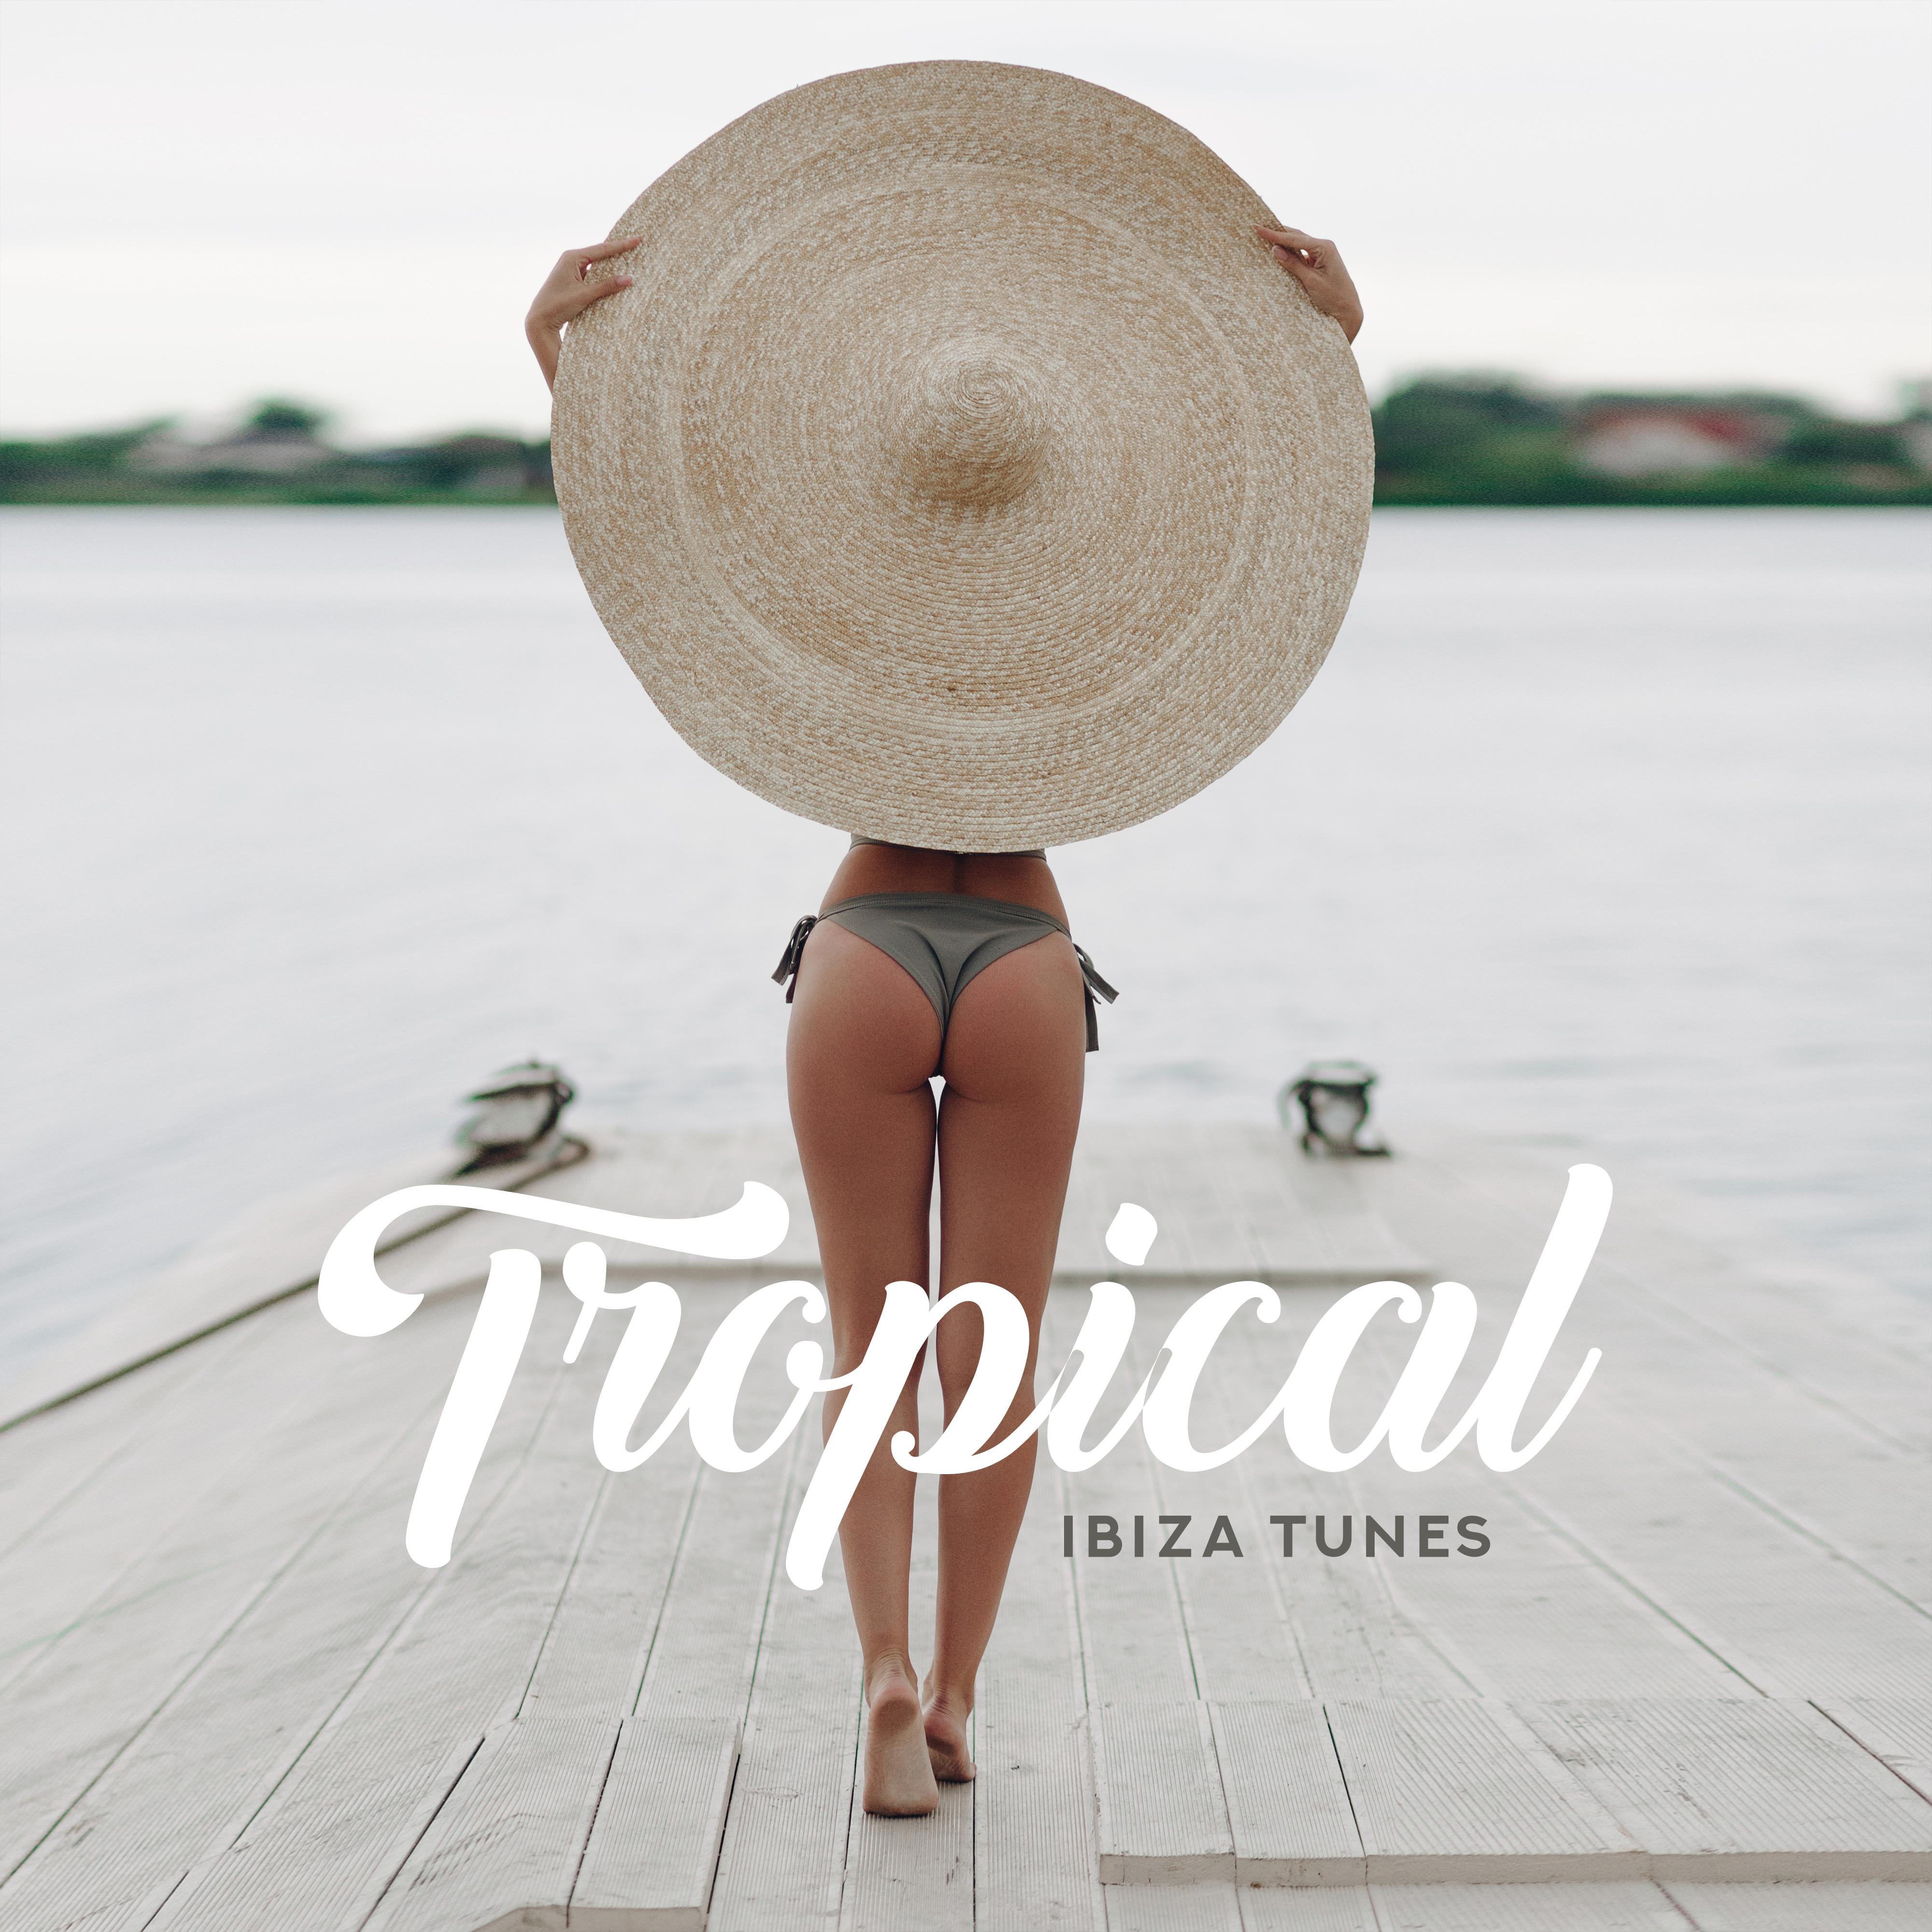 Tropical Ibiza Tunes  Sunny Ibiza, Relaxing Vibes, Vacation Songs, Music to Chill Out 2019